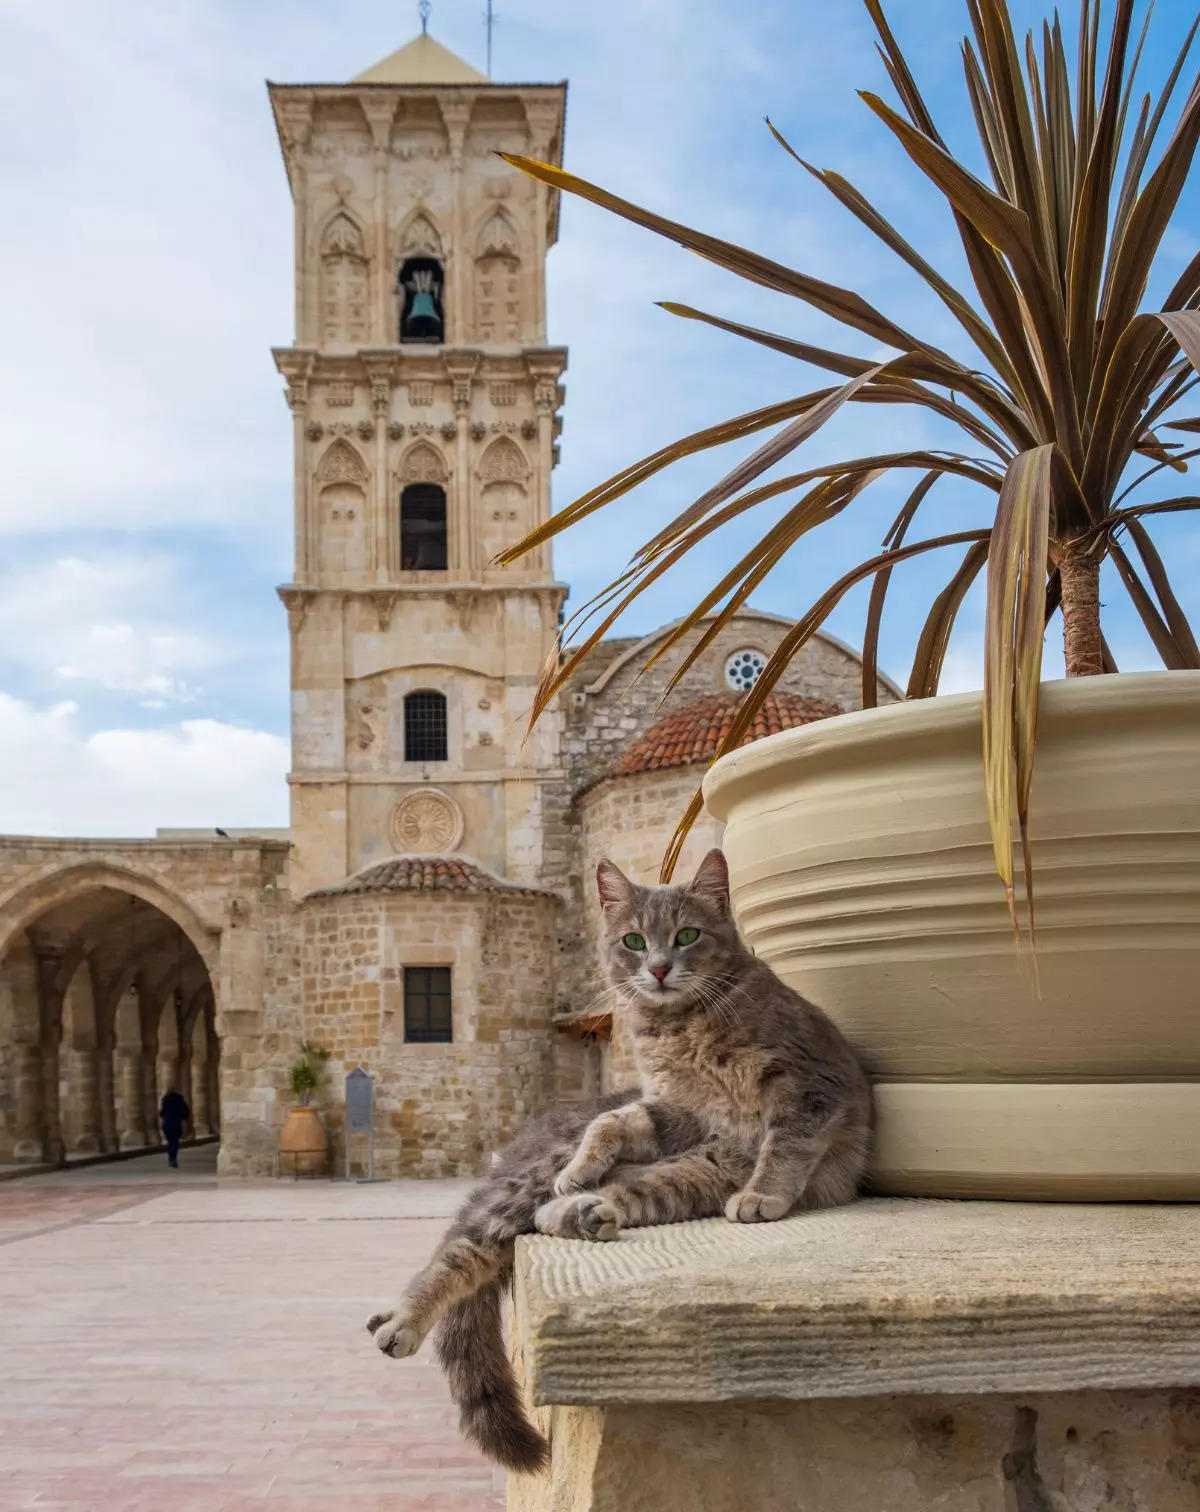 A cat pictured in the yard of St Lazarus Church in Larnaca Cyprus